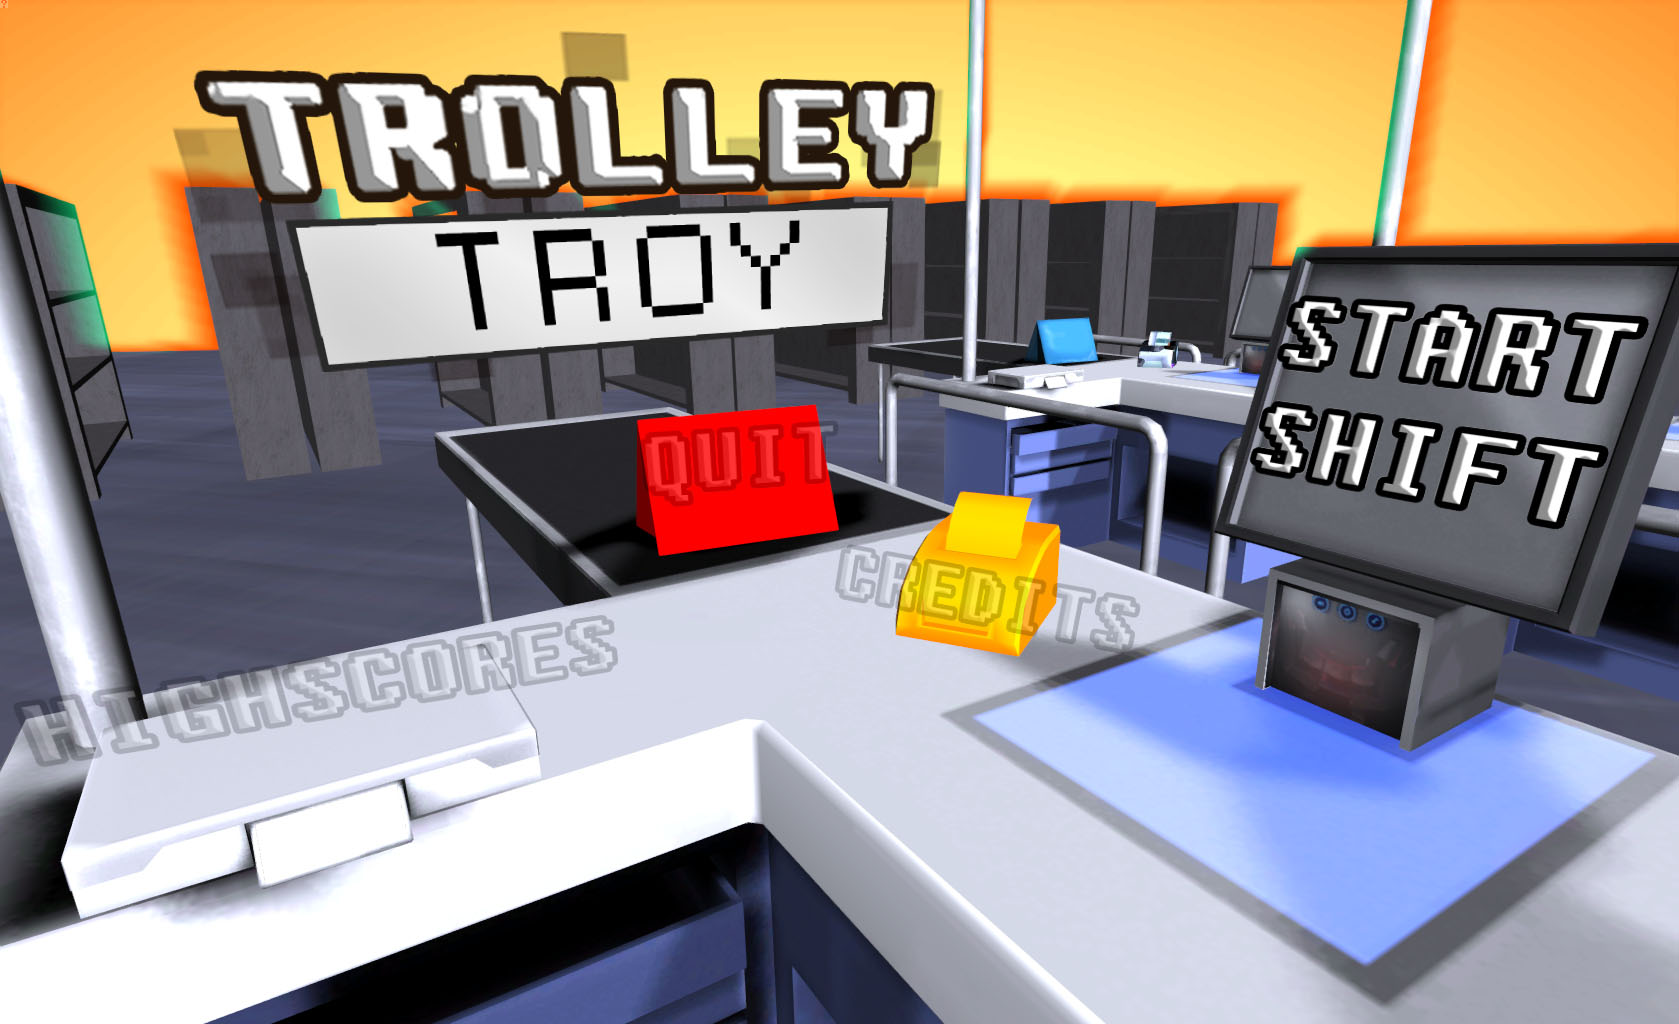 Trolley Troy Game-Play Image #1